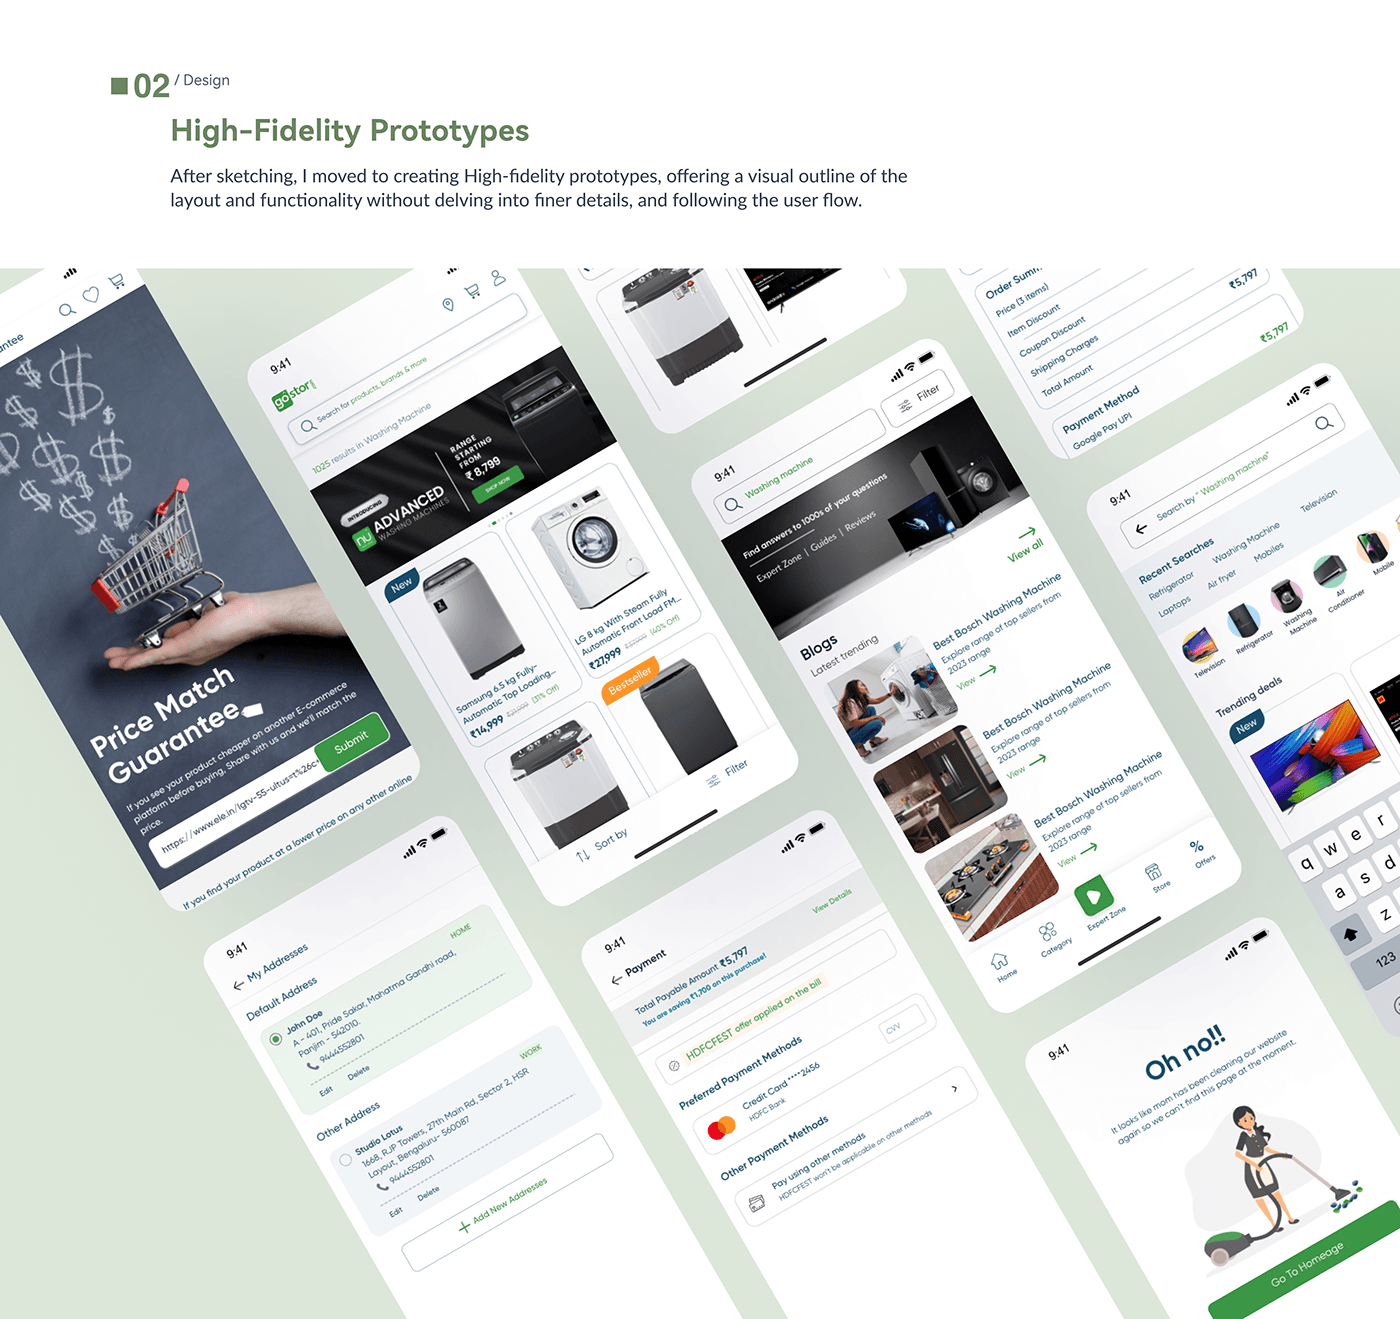 Ecommerce ecommerce website UI/UX user interface UX design Case Study Mobile app user experience redesign ecommerce store